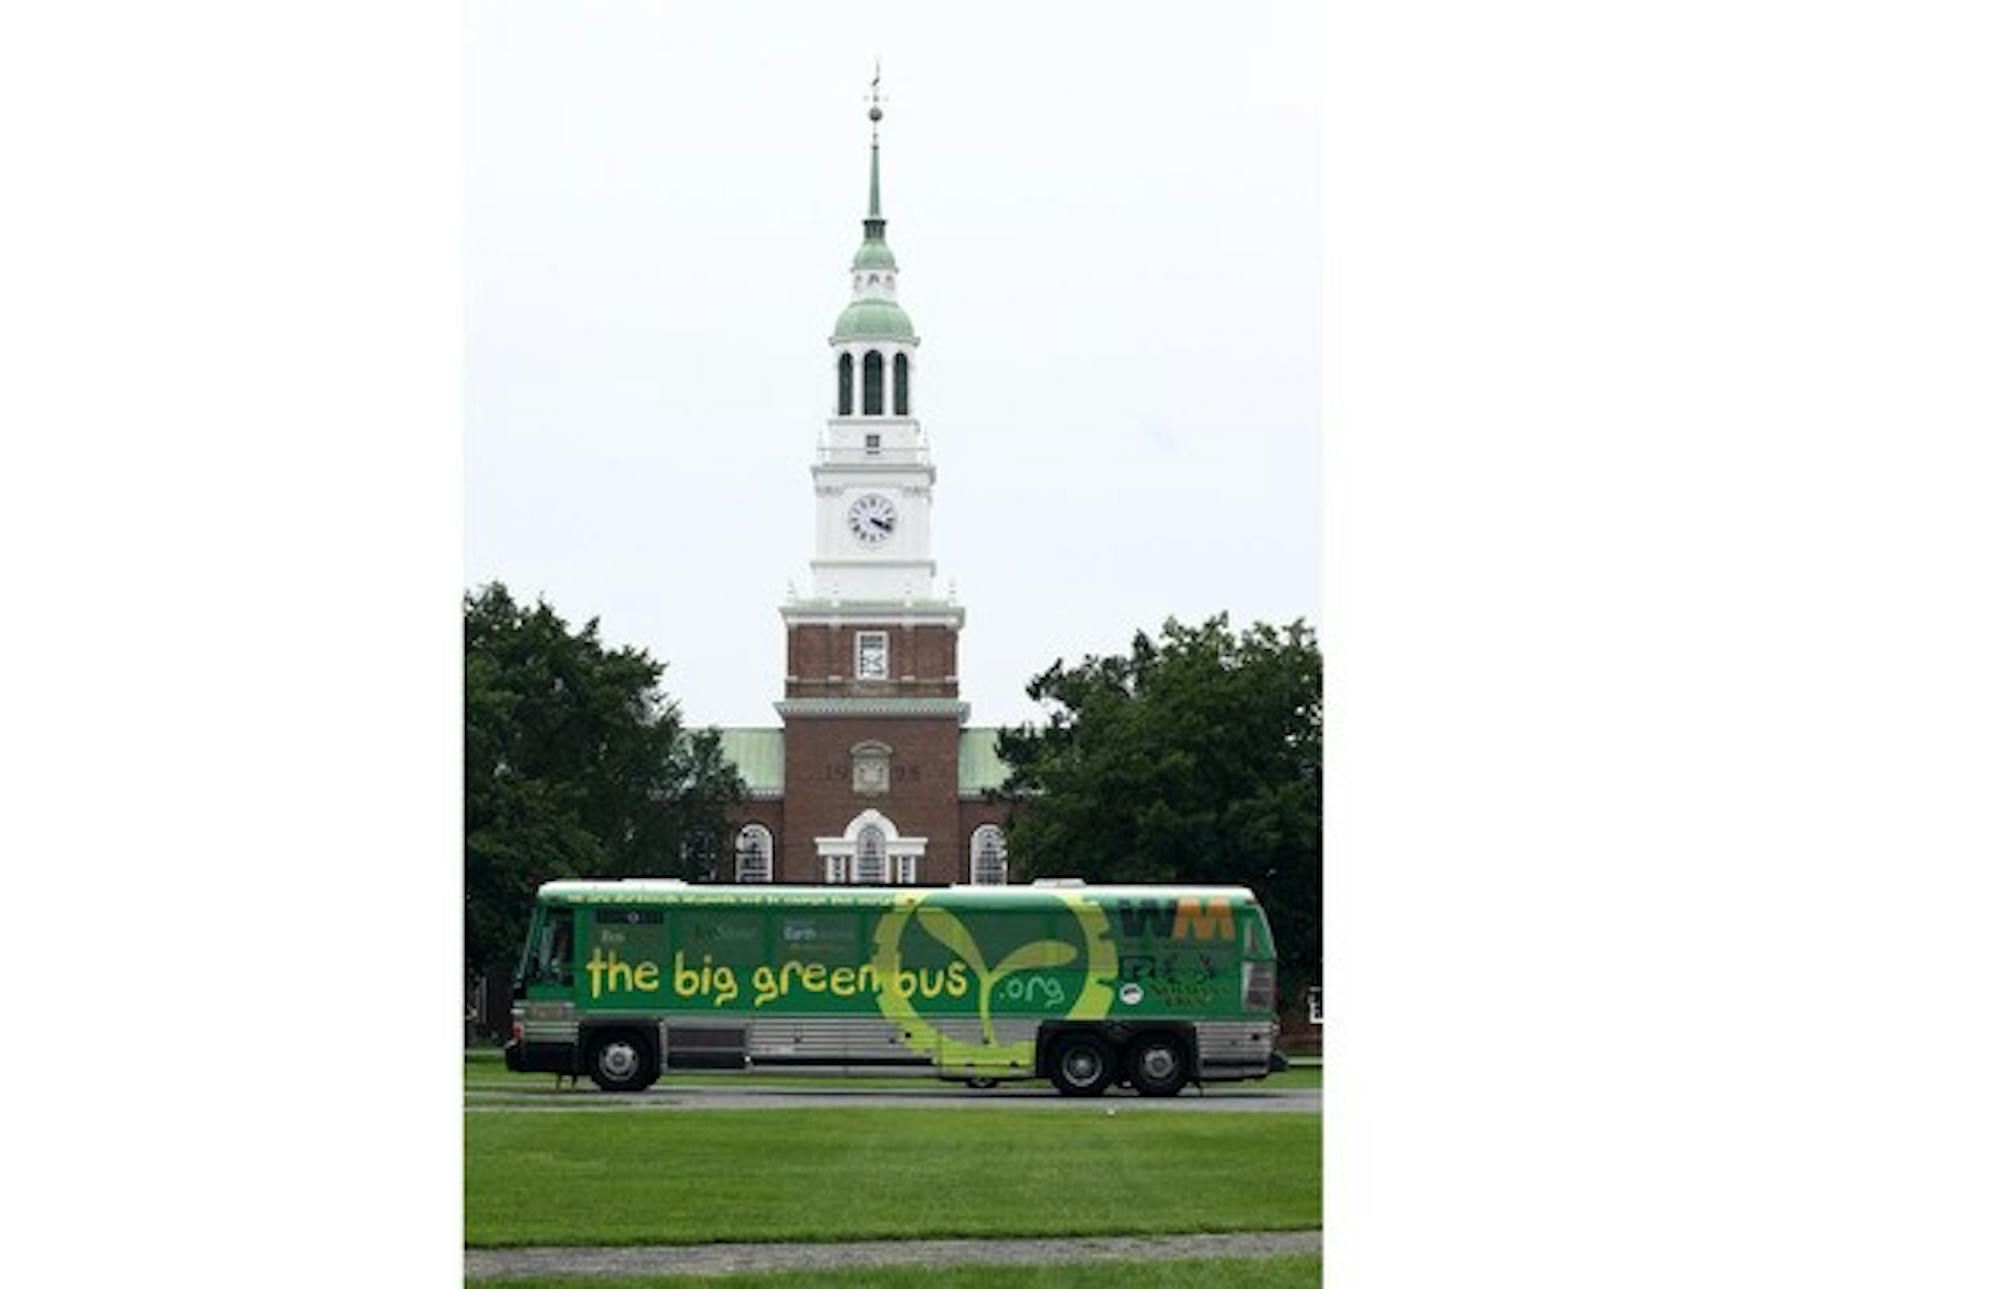 The Big Green Bus came to campus as part of the festivities for Earth Week 2010 before departing for a tour of Massachusetts.